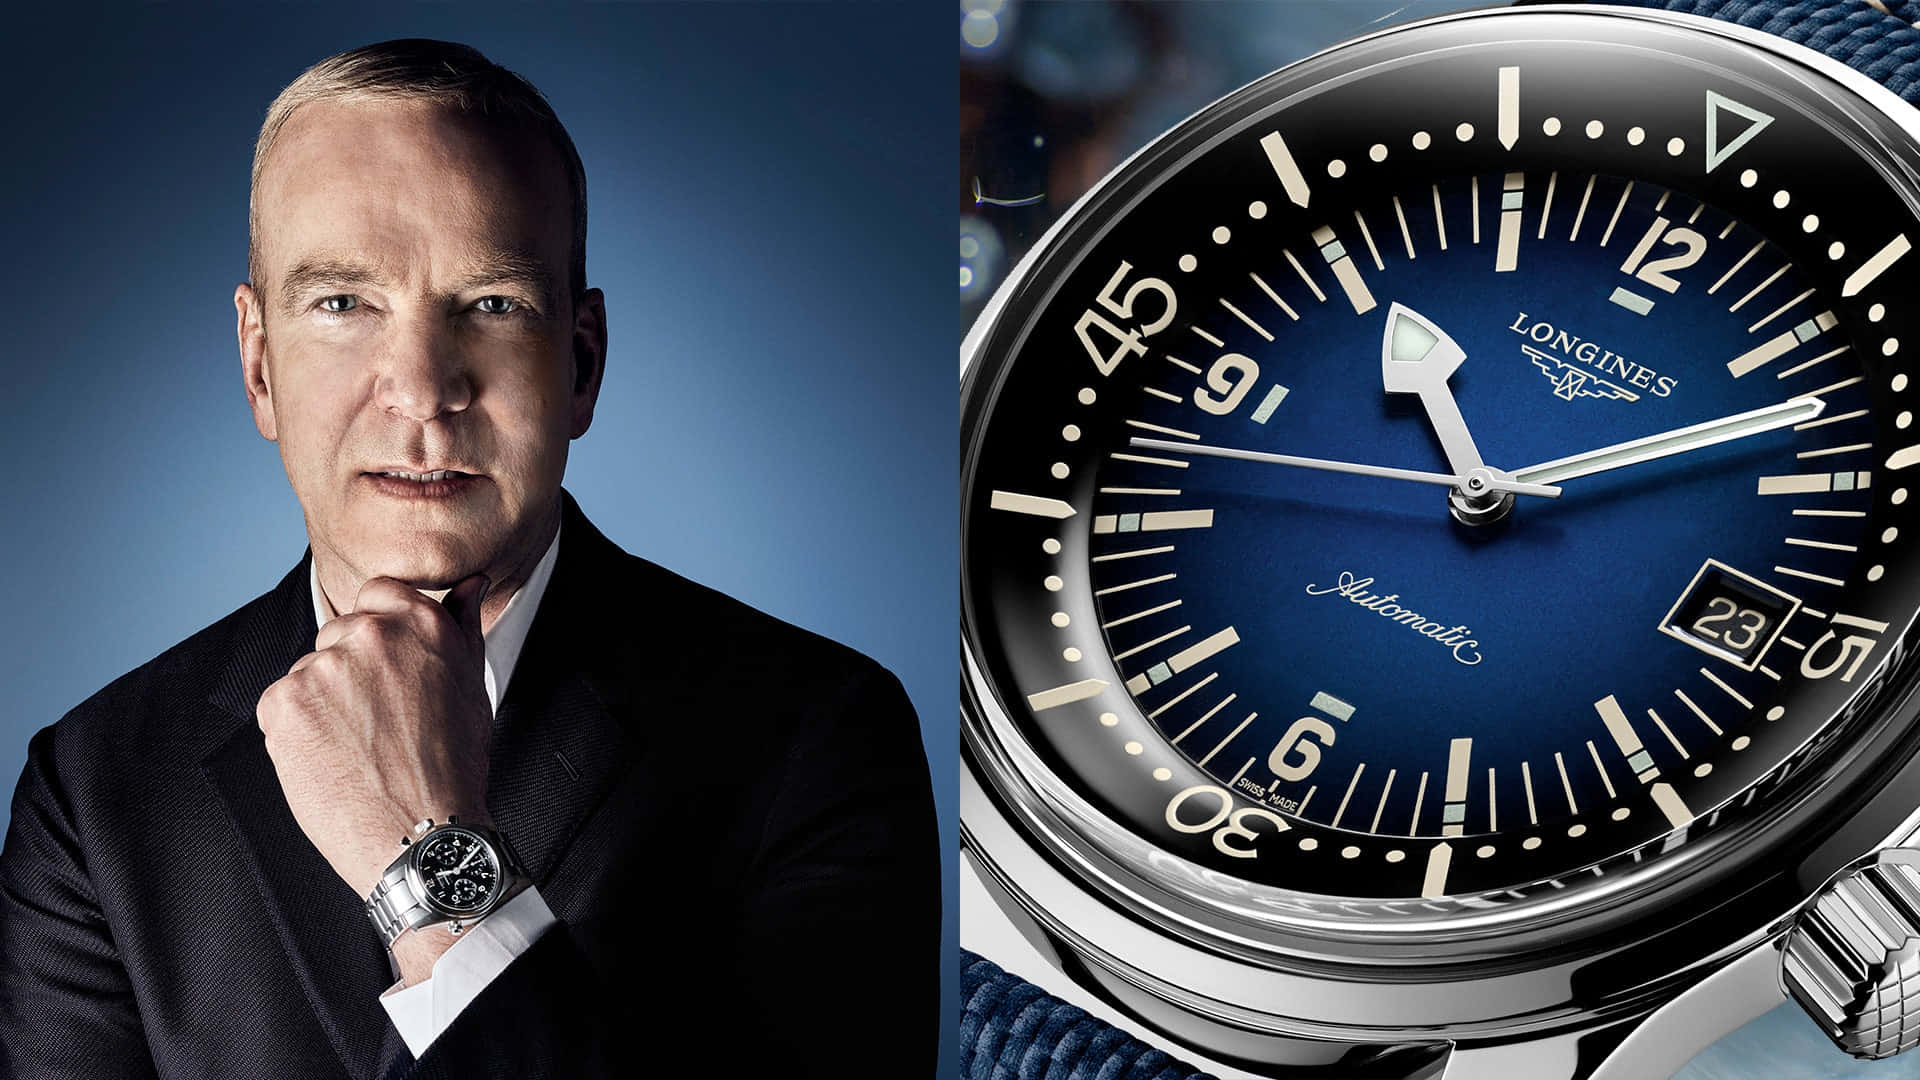 The Longines Ceo And Legend Diver Watch Background